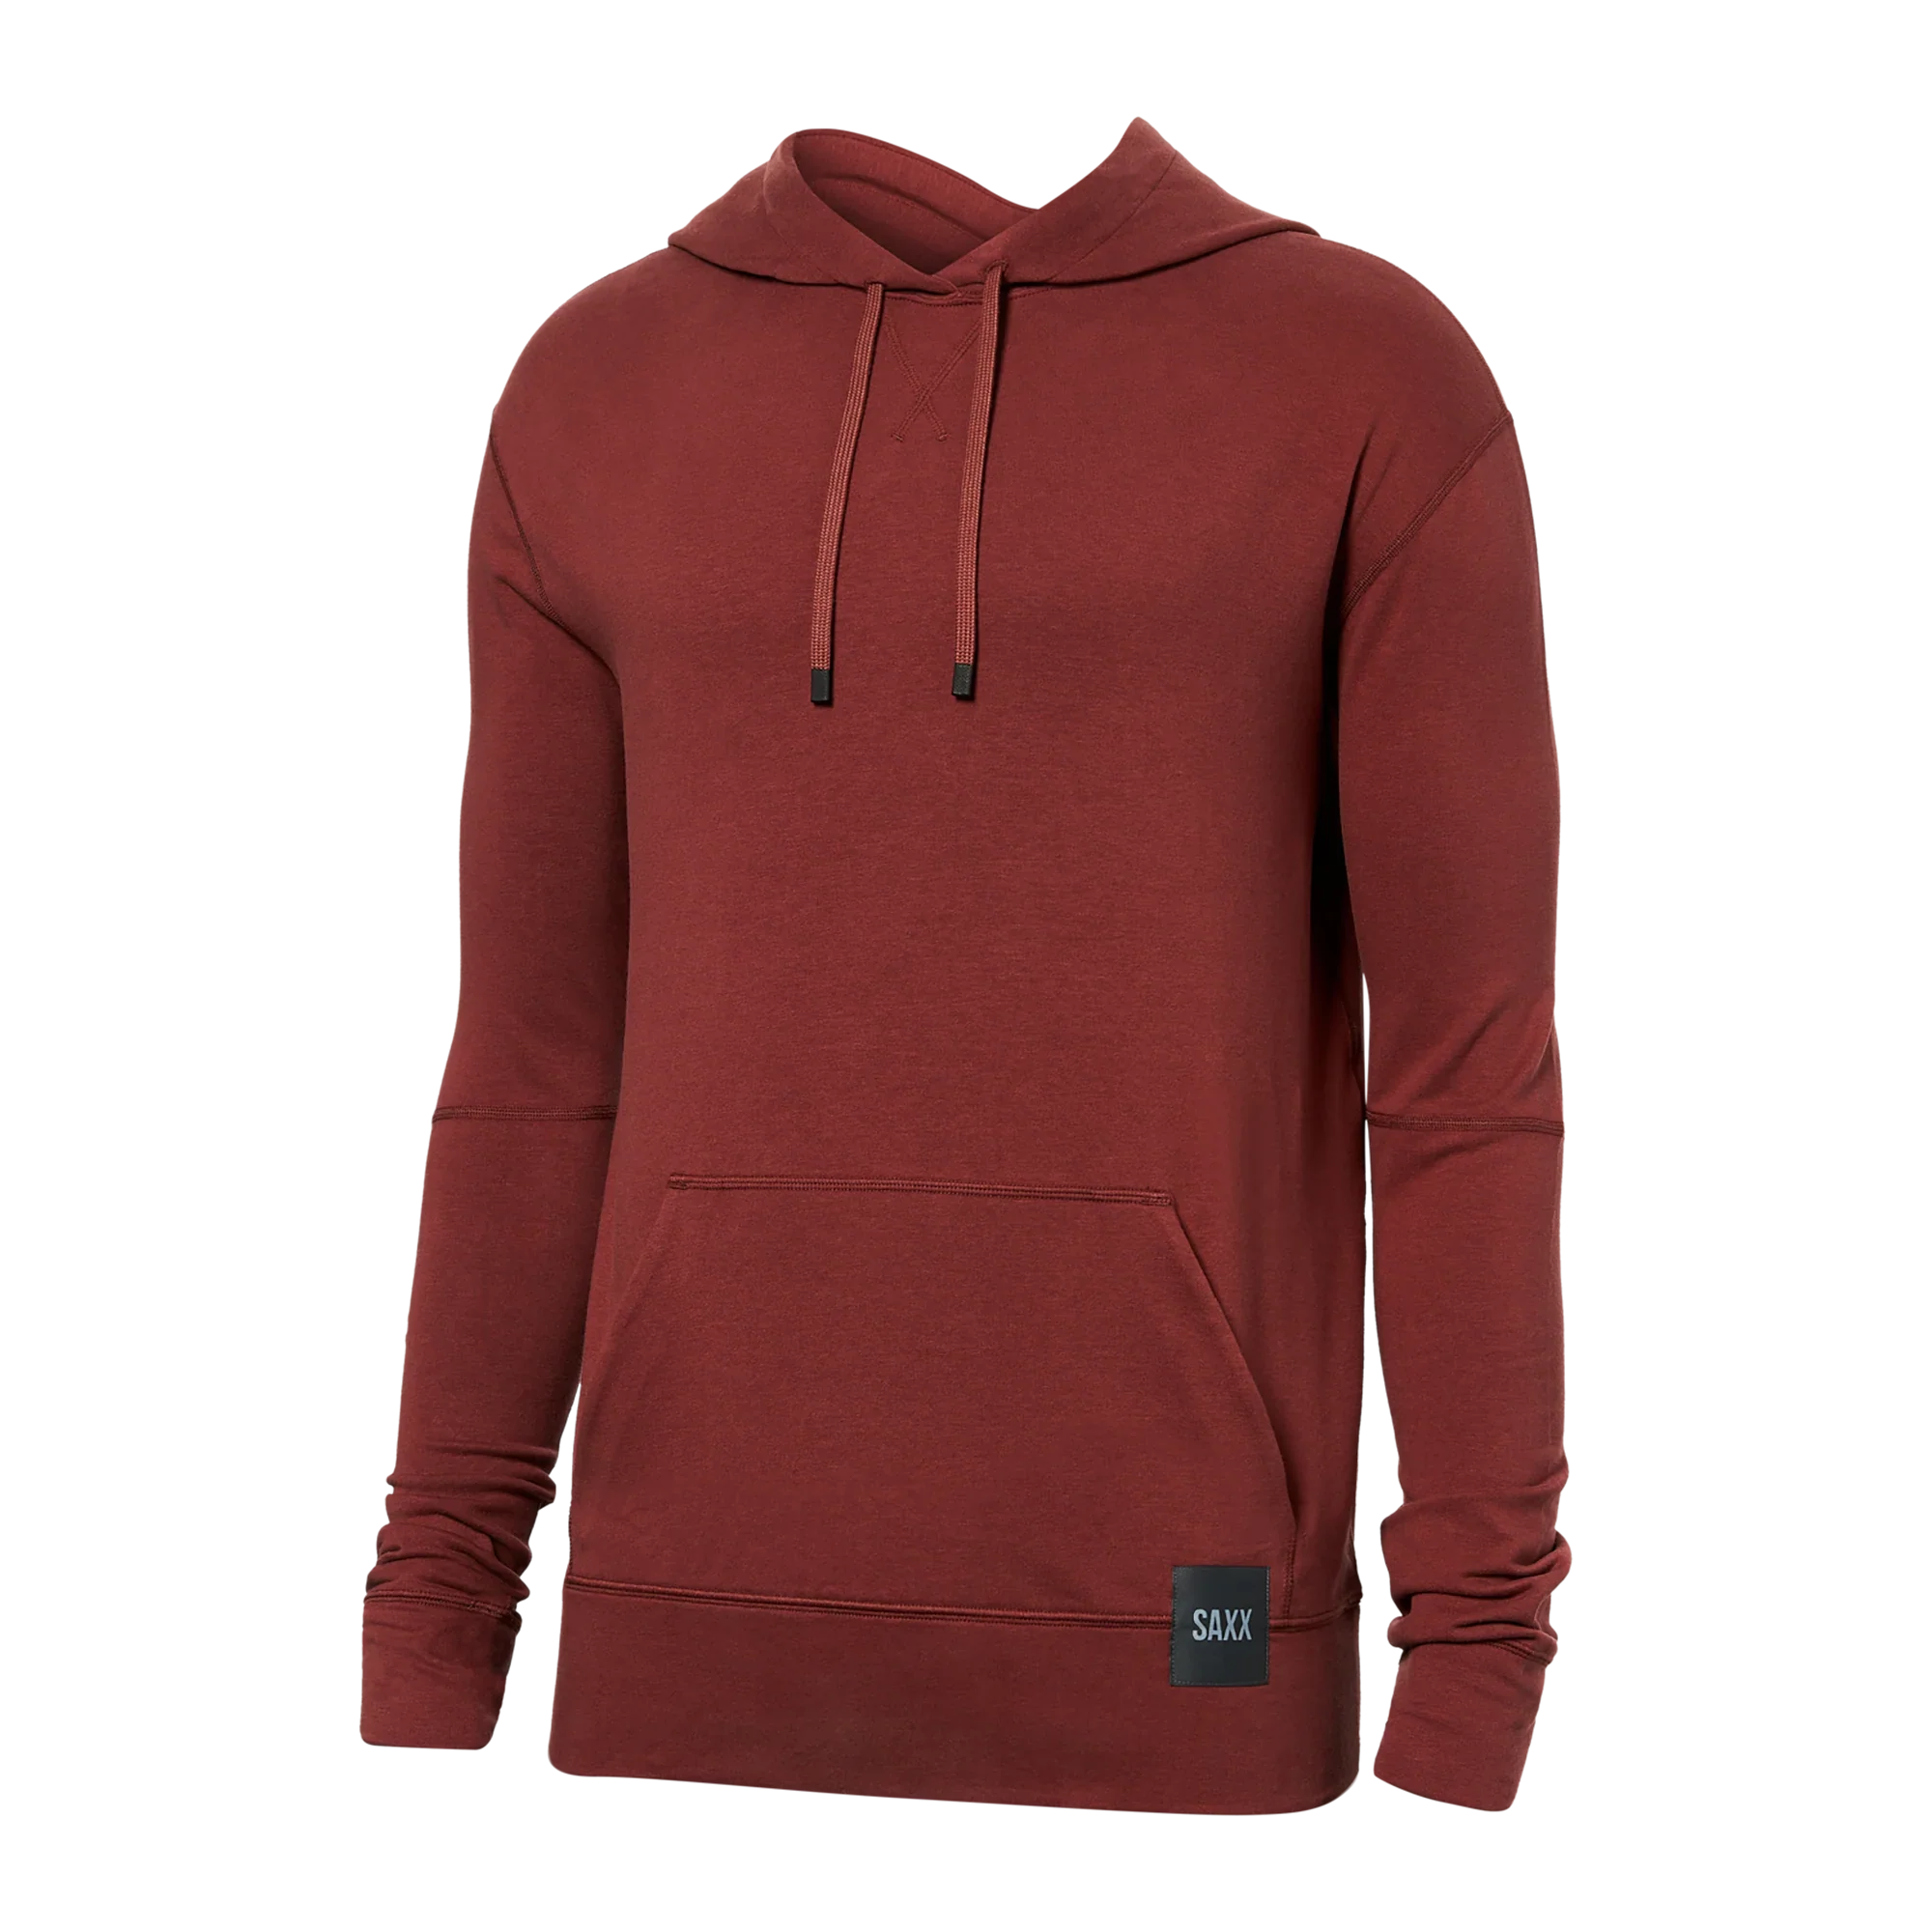 'SAXX 3Six Five Hoodie' in 'Sable' colour